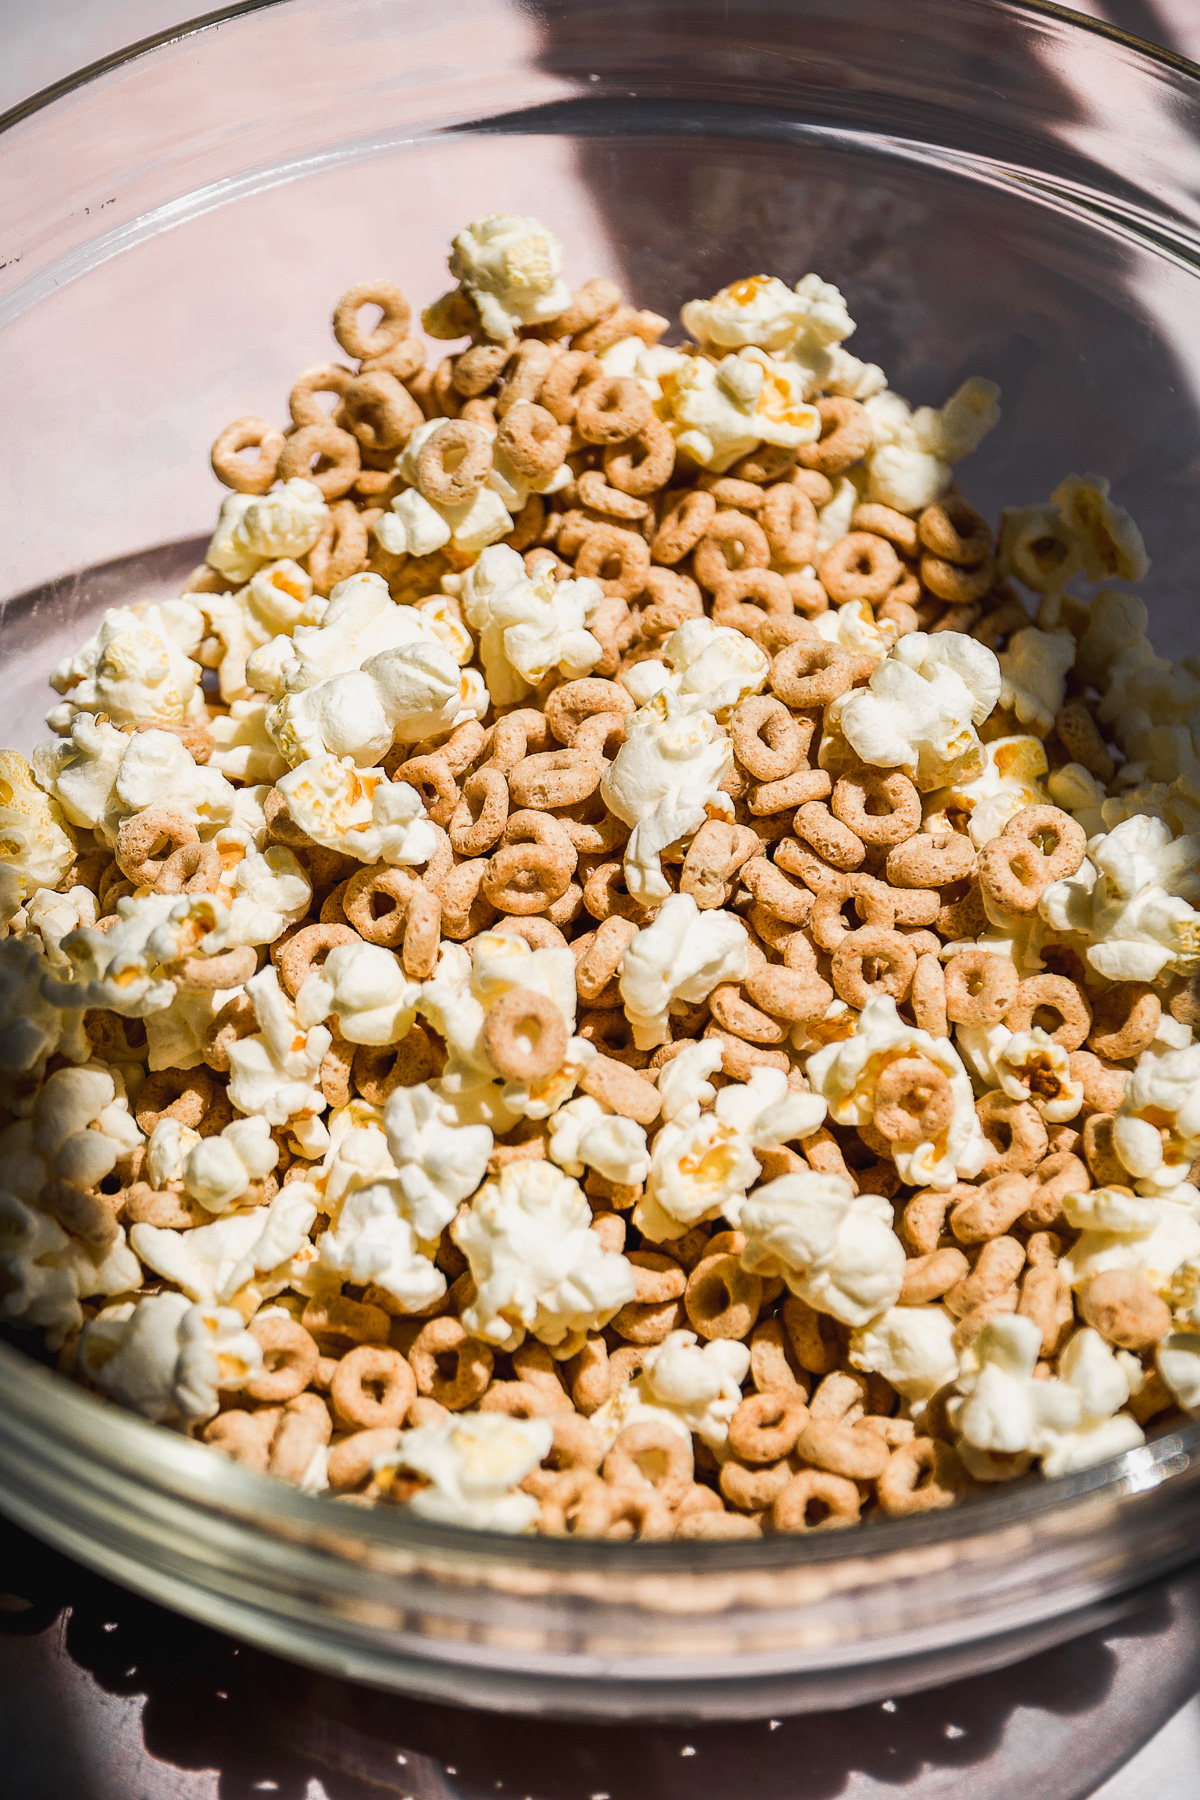 Large glass bowl with cheerios and popcorn.